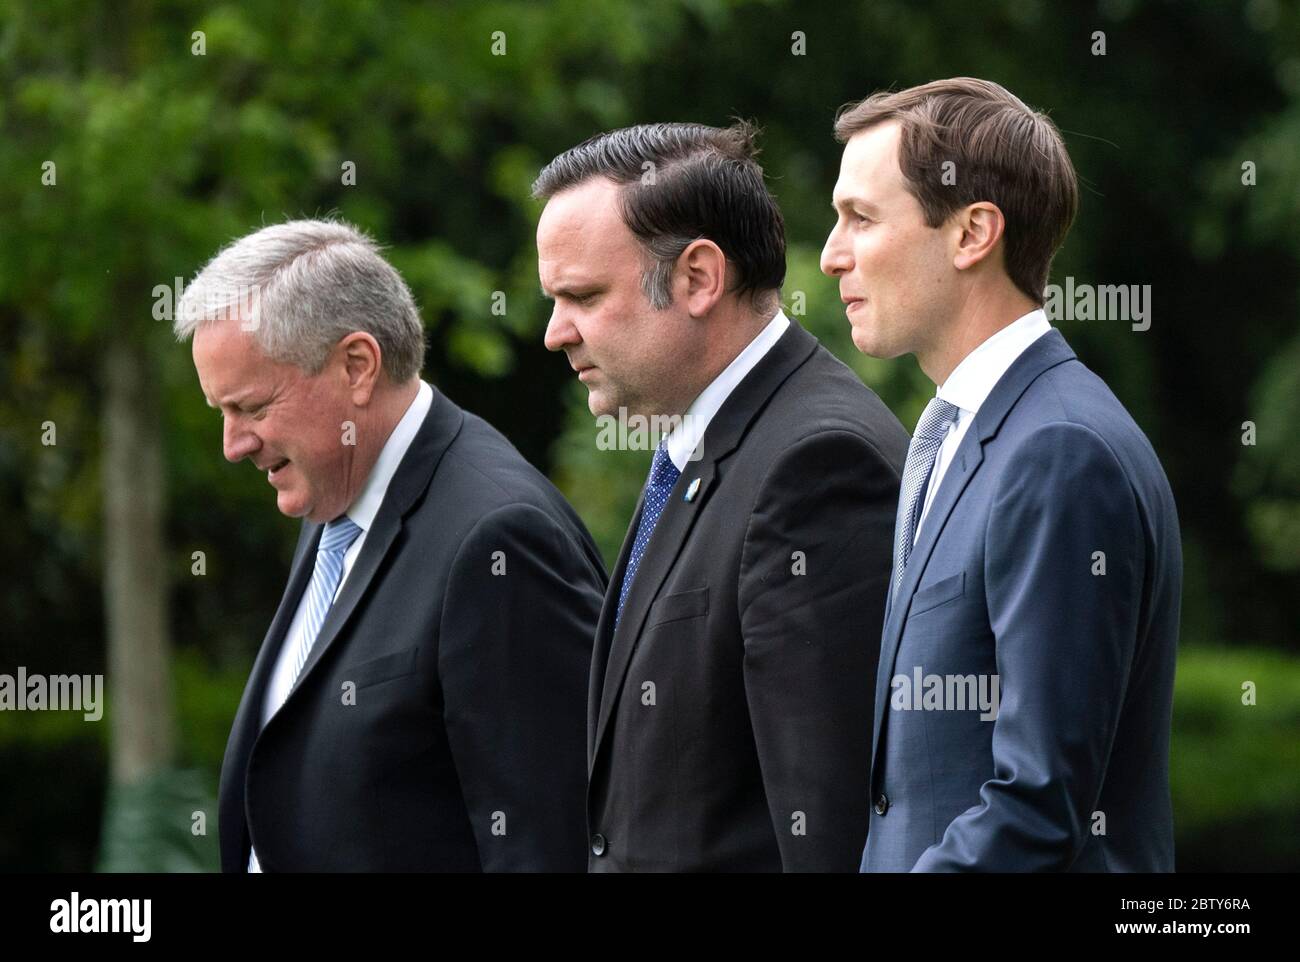 From left to right, Acting Chief of Staff Mark Meadows, Dan Scavino, White House Deputy Chief of Staff for Communications, and Jared Kushner, Presidential advisor and President Trump's son-in-law, depart the White House with President Donald Trump, in Washington, DC on Wednesday, May 27, 2020. President Trump and the First Lady are traveling to NASA's Kennedy Space Center to watch the SpaceX Mission 2 launch. Credit: Kevin Dietsch/Pool via CNP /MediaPunch Stock Photo